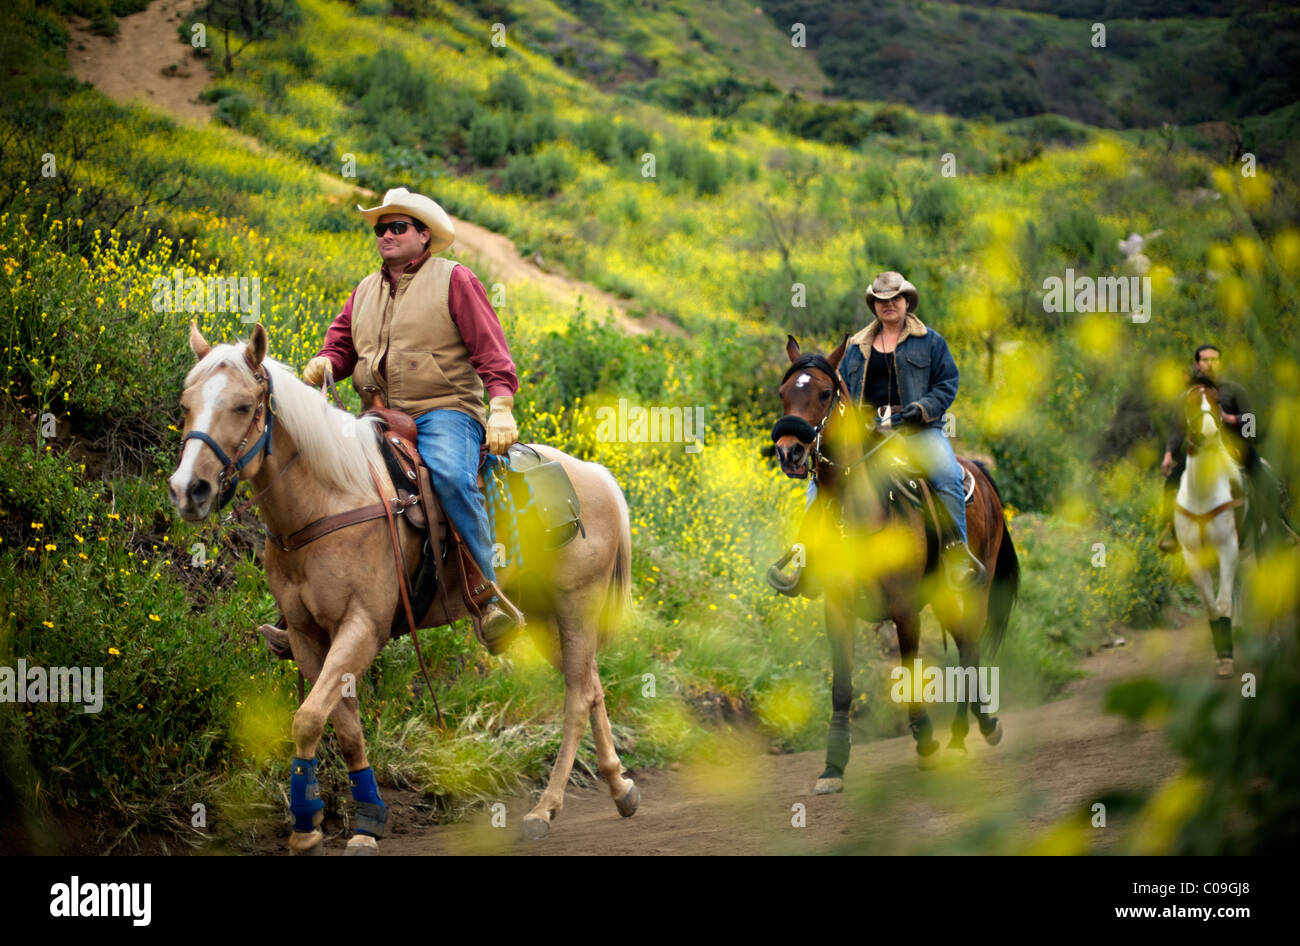 Riders On Horseback Make Their Way Along A Trail Lined With Blooming